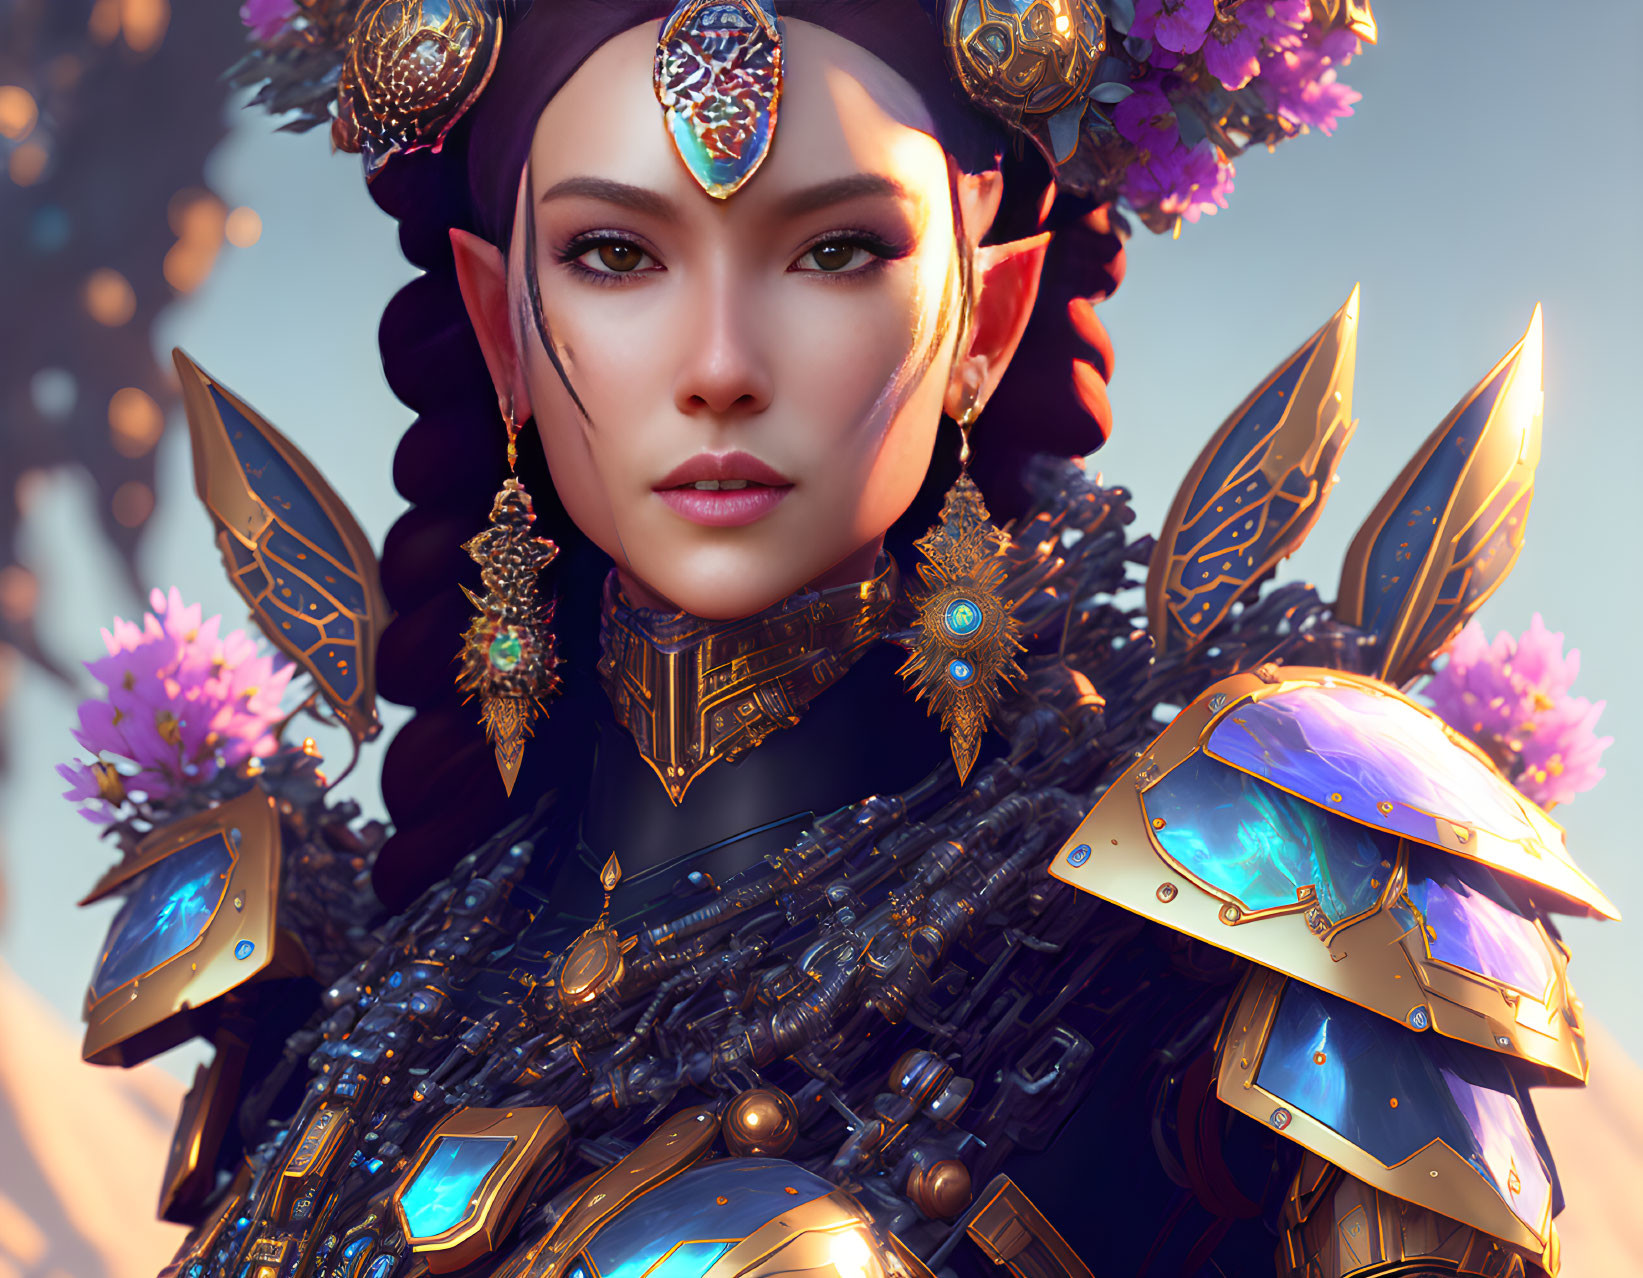 Digital portrait of woman in decorative armor with gemstones and gold details